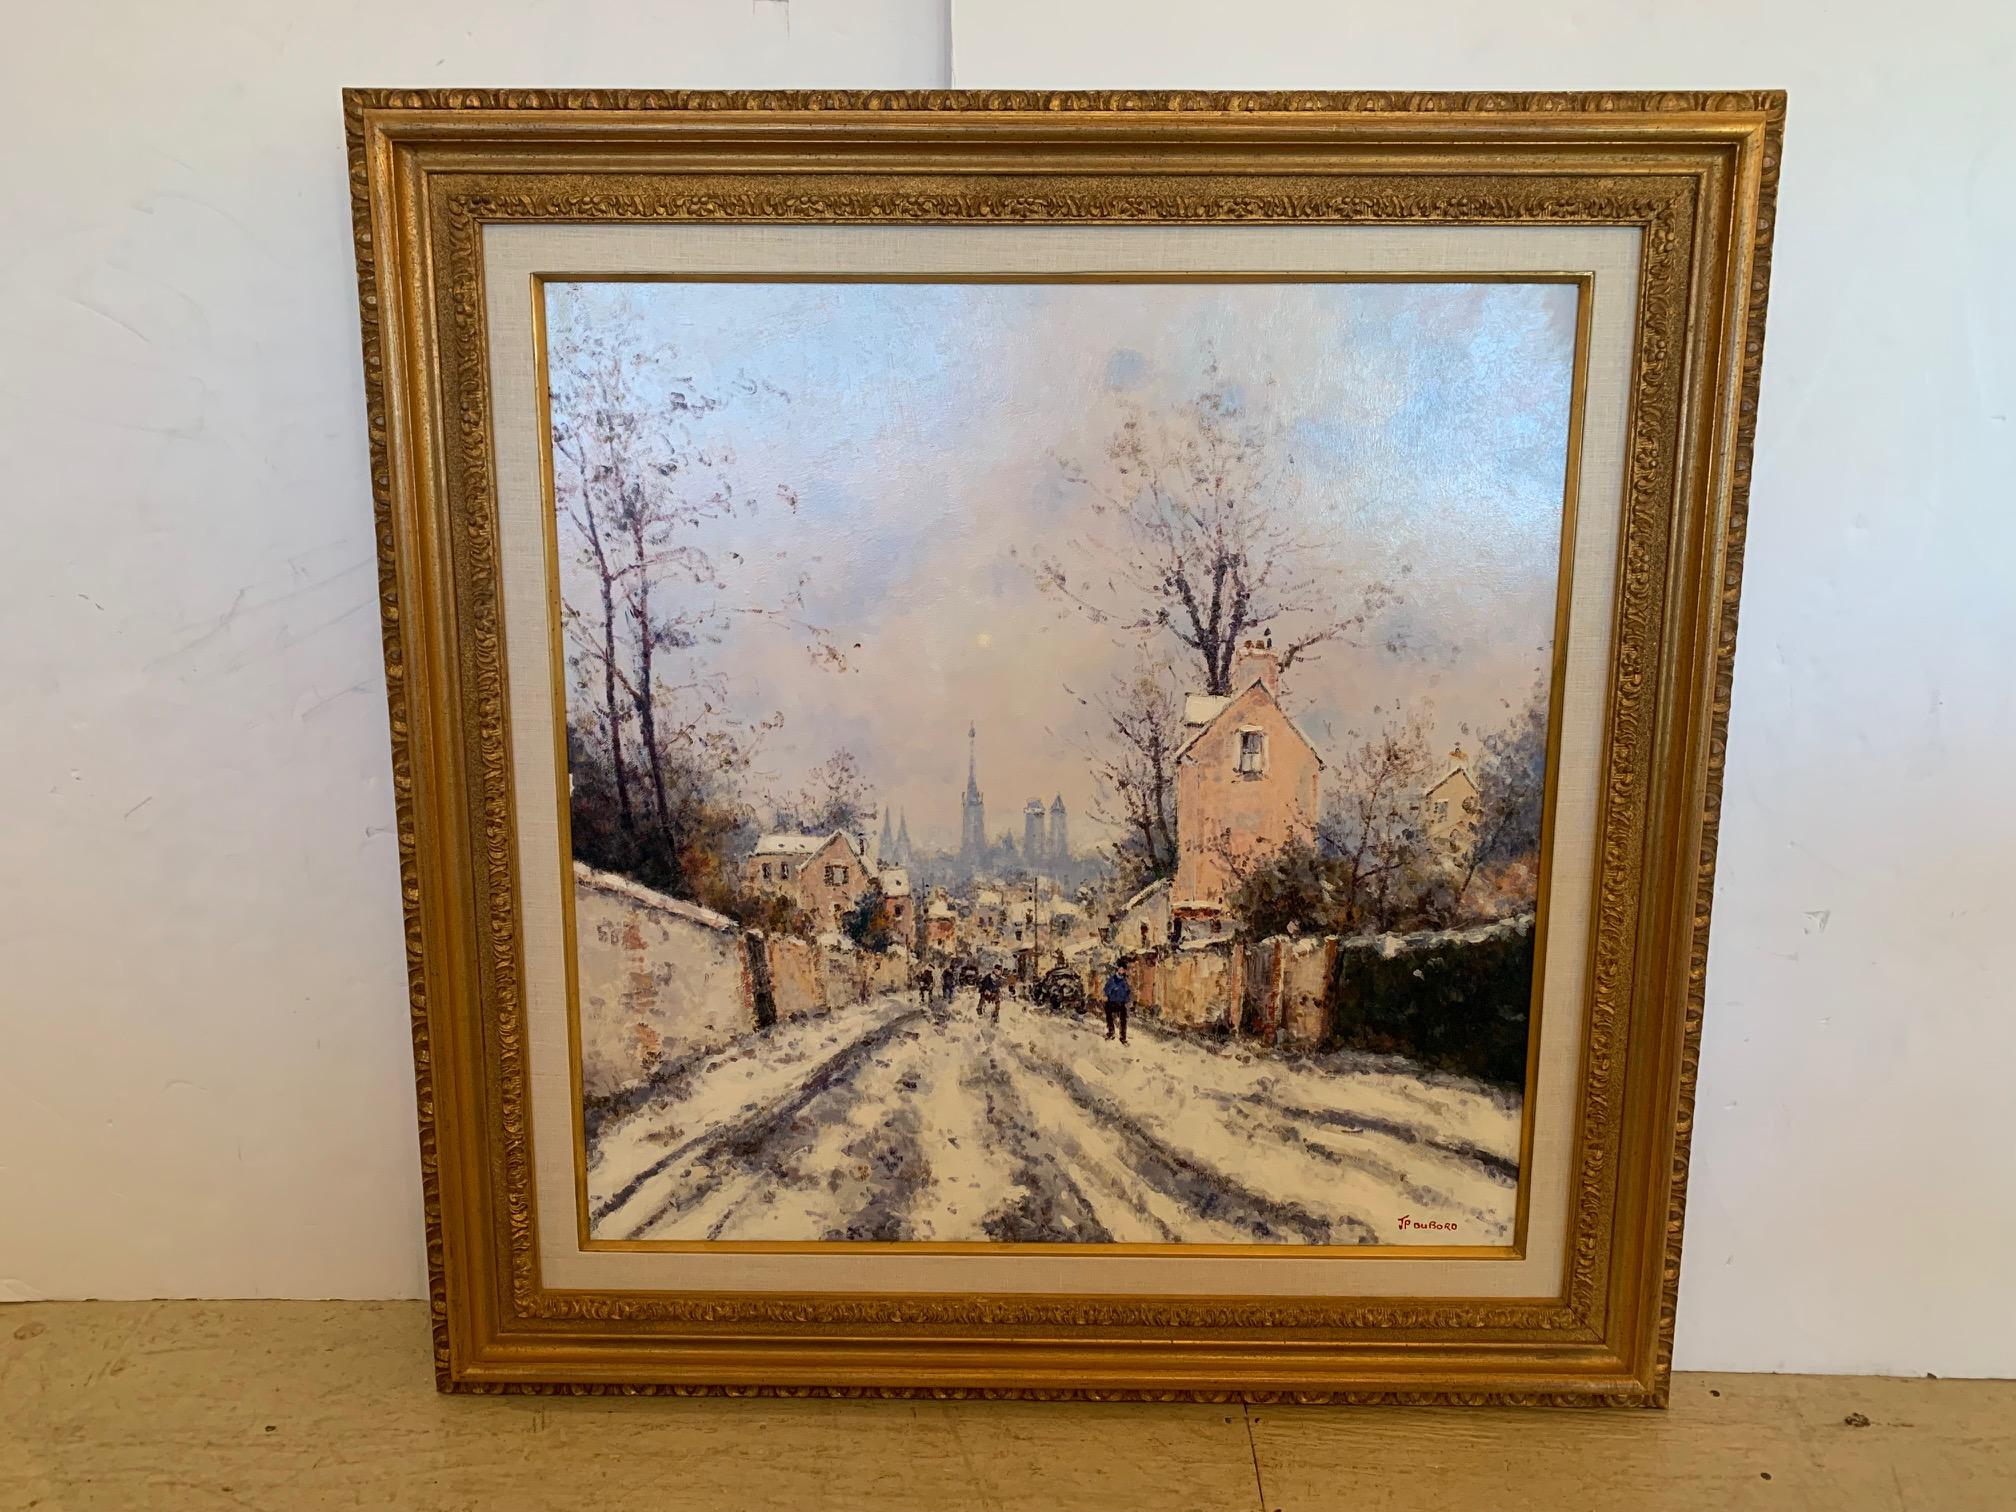 Striking large painting of listed French impressionist, J.P. Dubord. Subject is a village road covered in snow. Signed lower right. Dubordwas born in Rouen in 1940. After spending years in the French countryside, he returned to his native city to